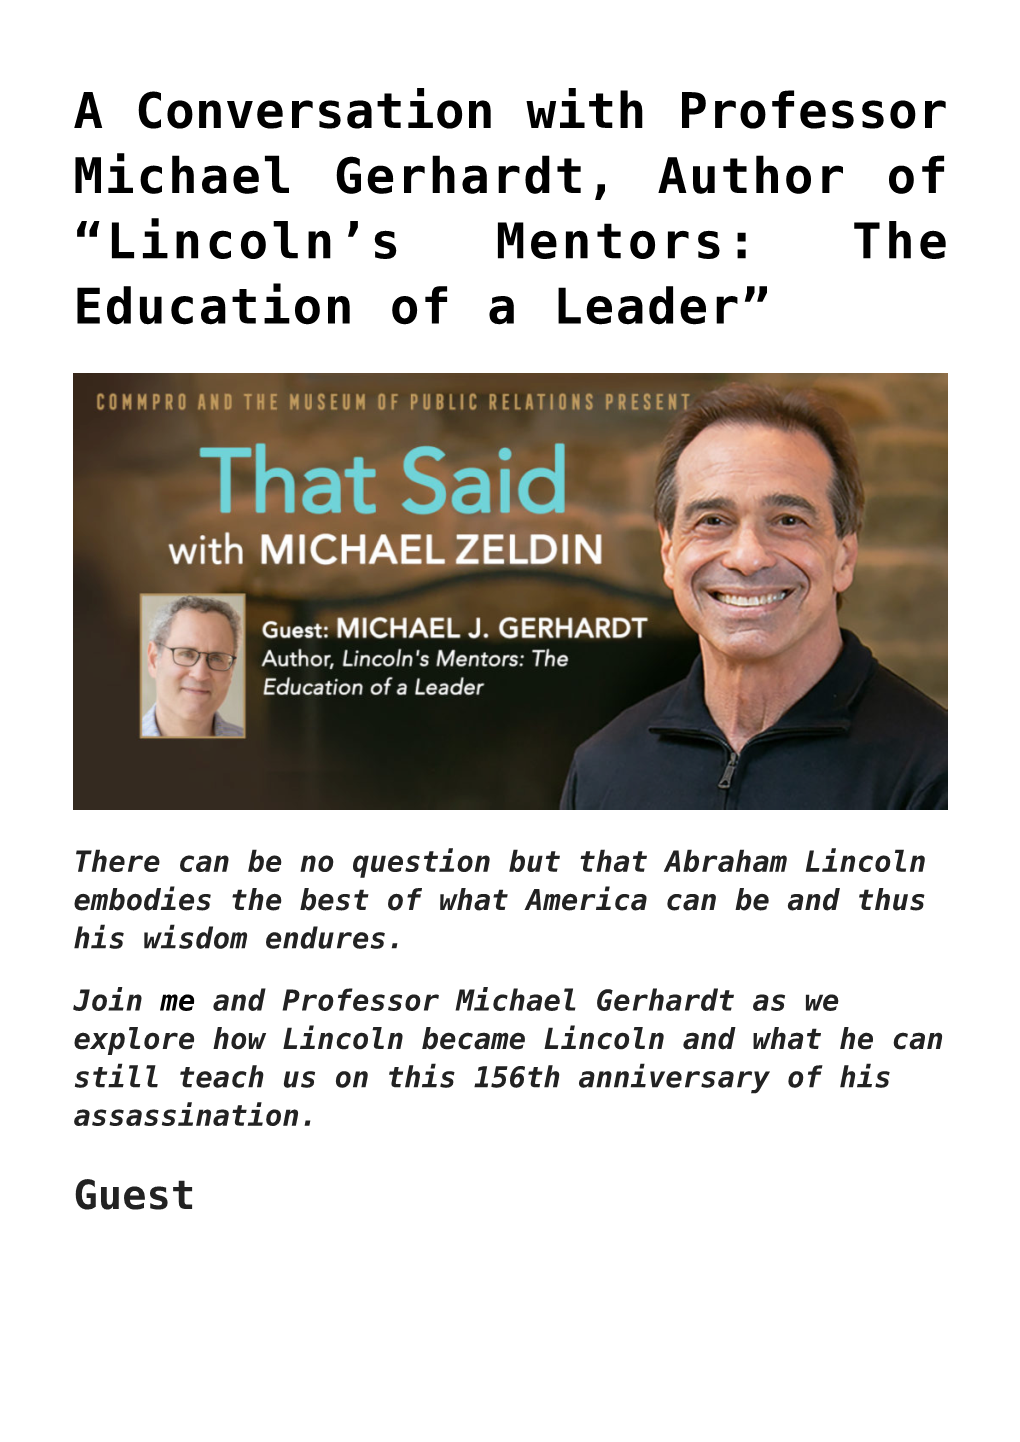 A Conversation with Professor Michael Gerhardt, Author of “Lincoln’S Mentors: the Education of a Leader”